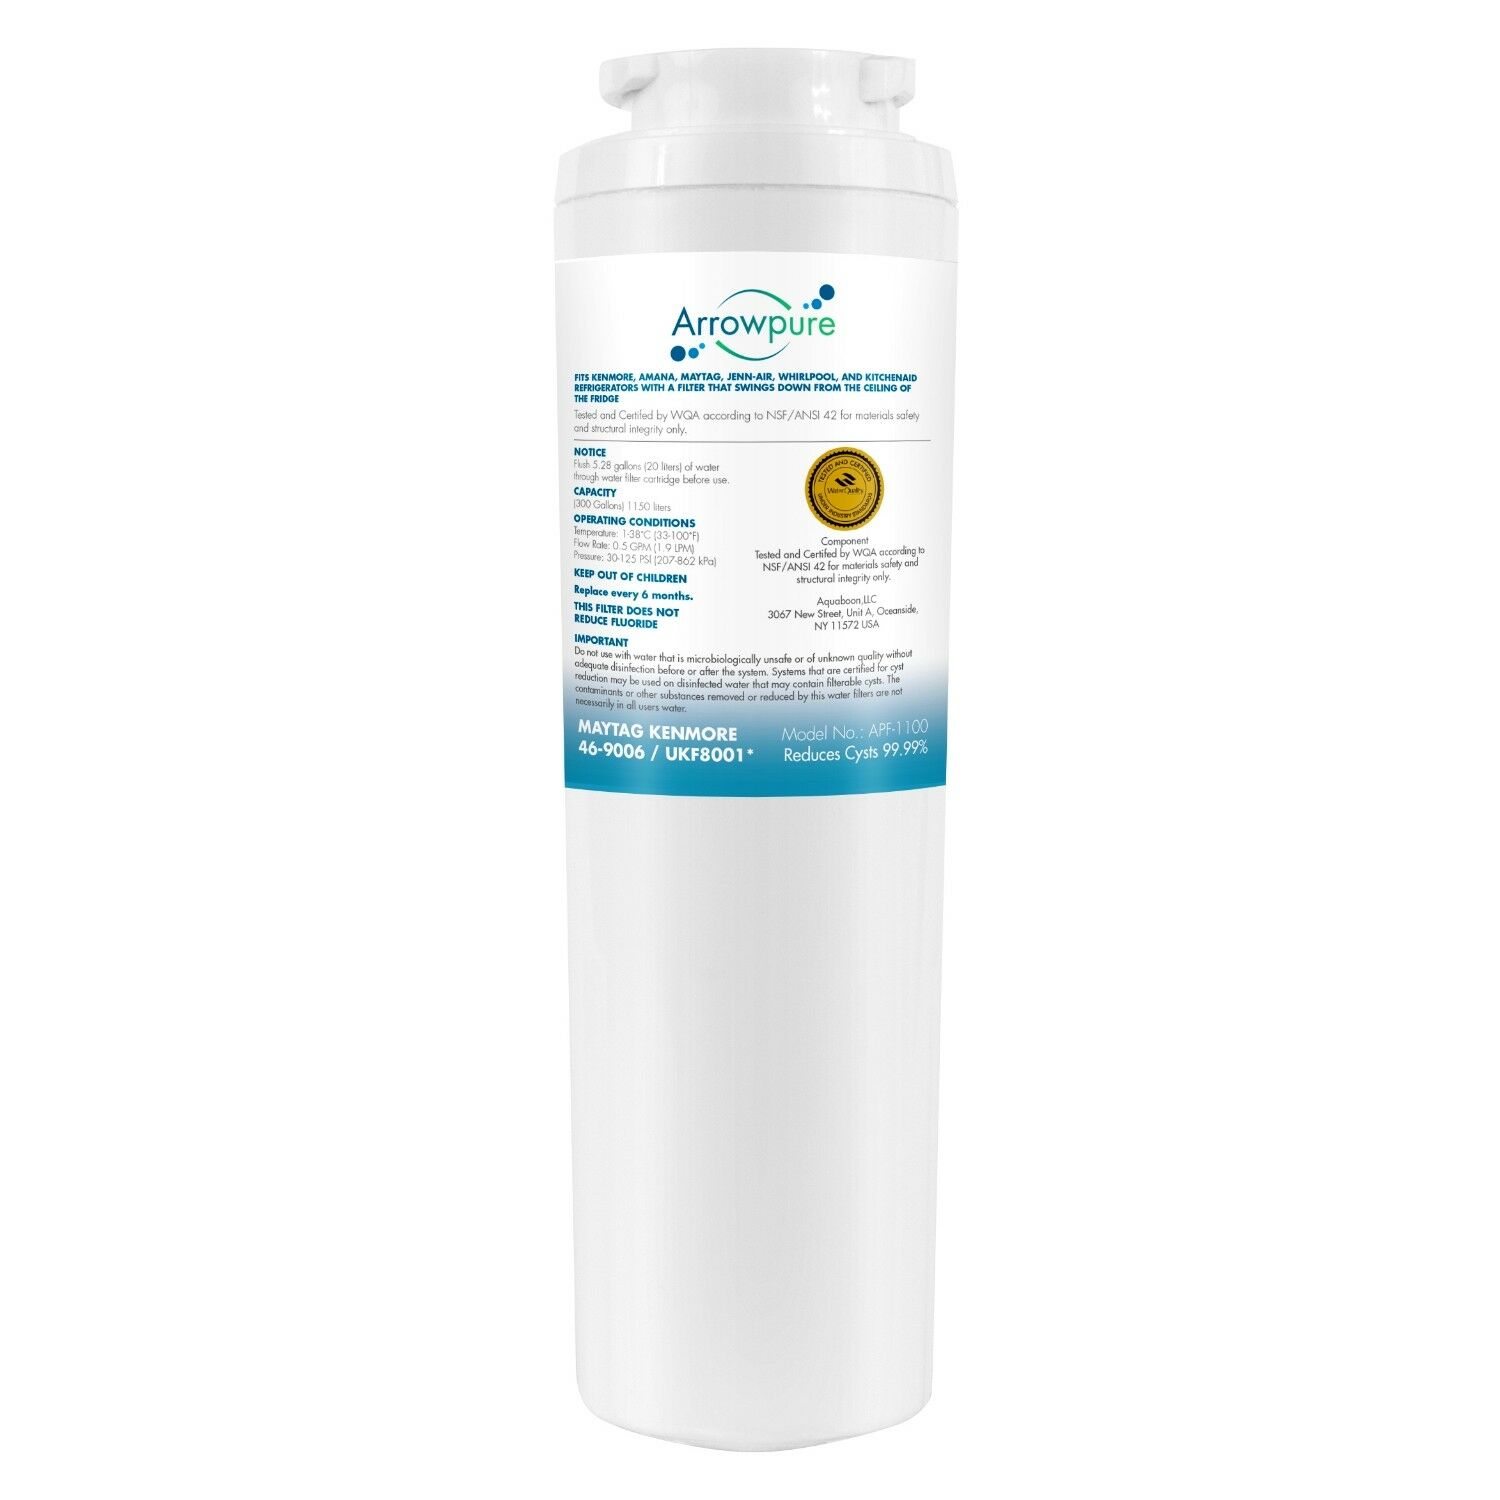 Arrowpure UKF8001 Refrigerator Water Filter Replacement Cartridge | Certified According to NSF 42&372 | Compatible with Maytag UKF8001AXX, 46-9992, 9005, Filter 4, PURICLEAN II, MFI2568AES, 3 Pack - image 4 of 4